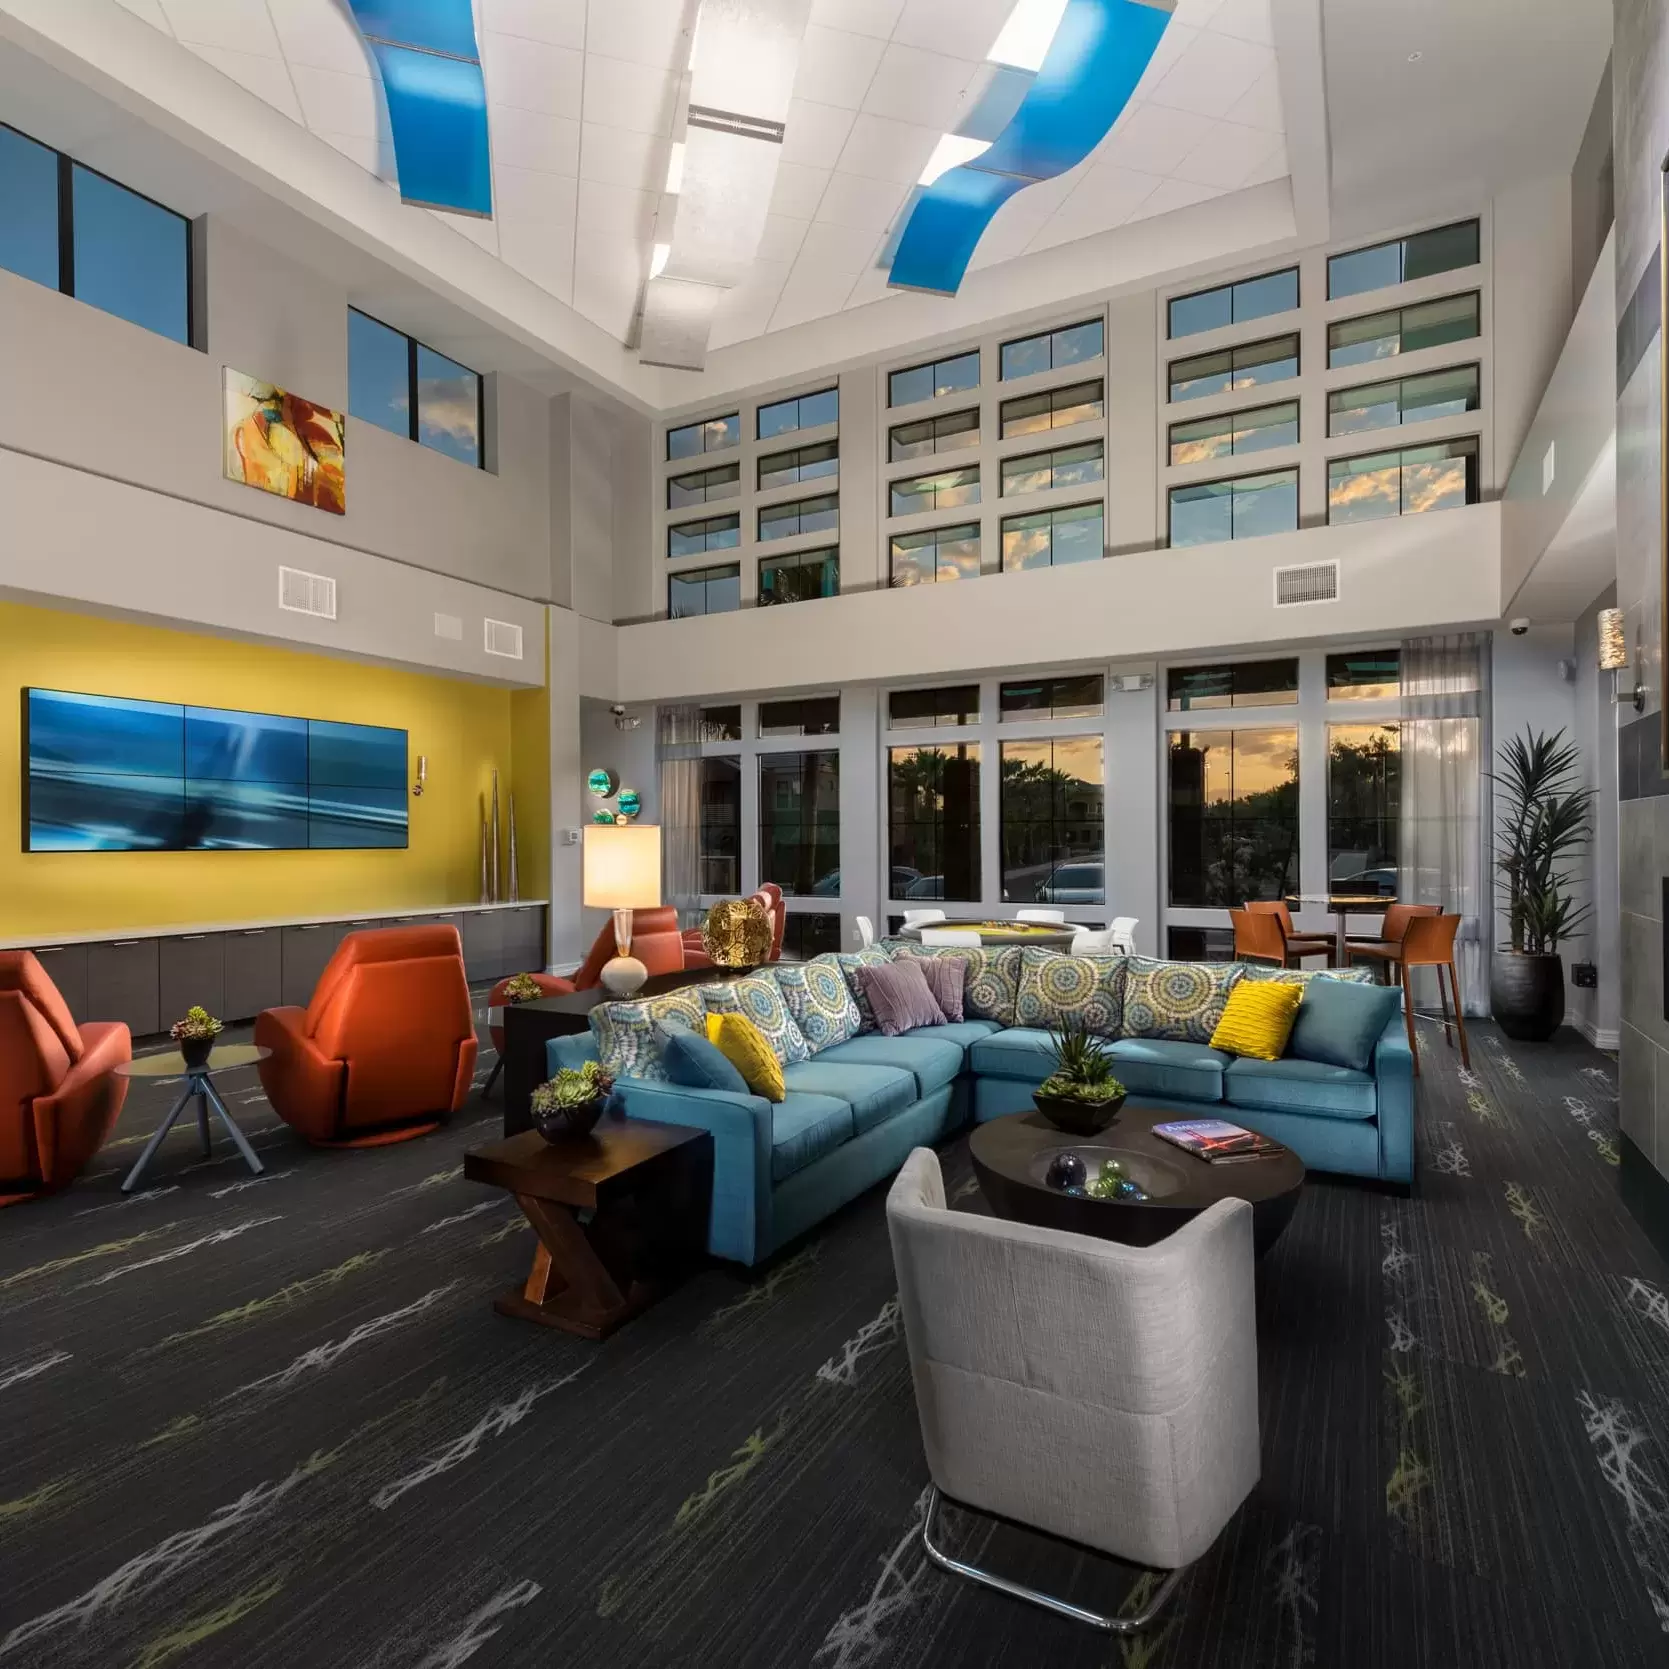 The Resident Hub, with plenty of comfortable seating for residents to socialize or relax.